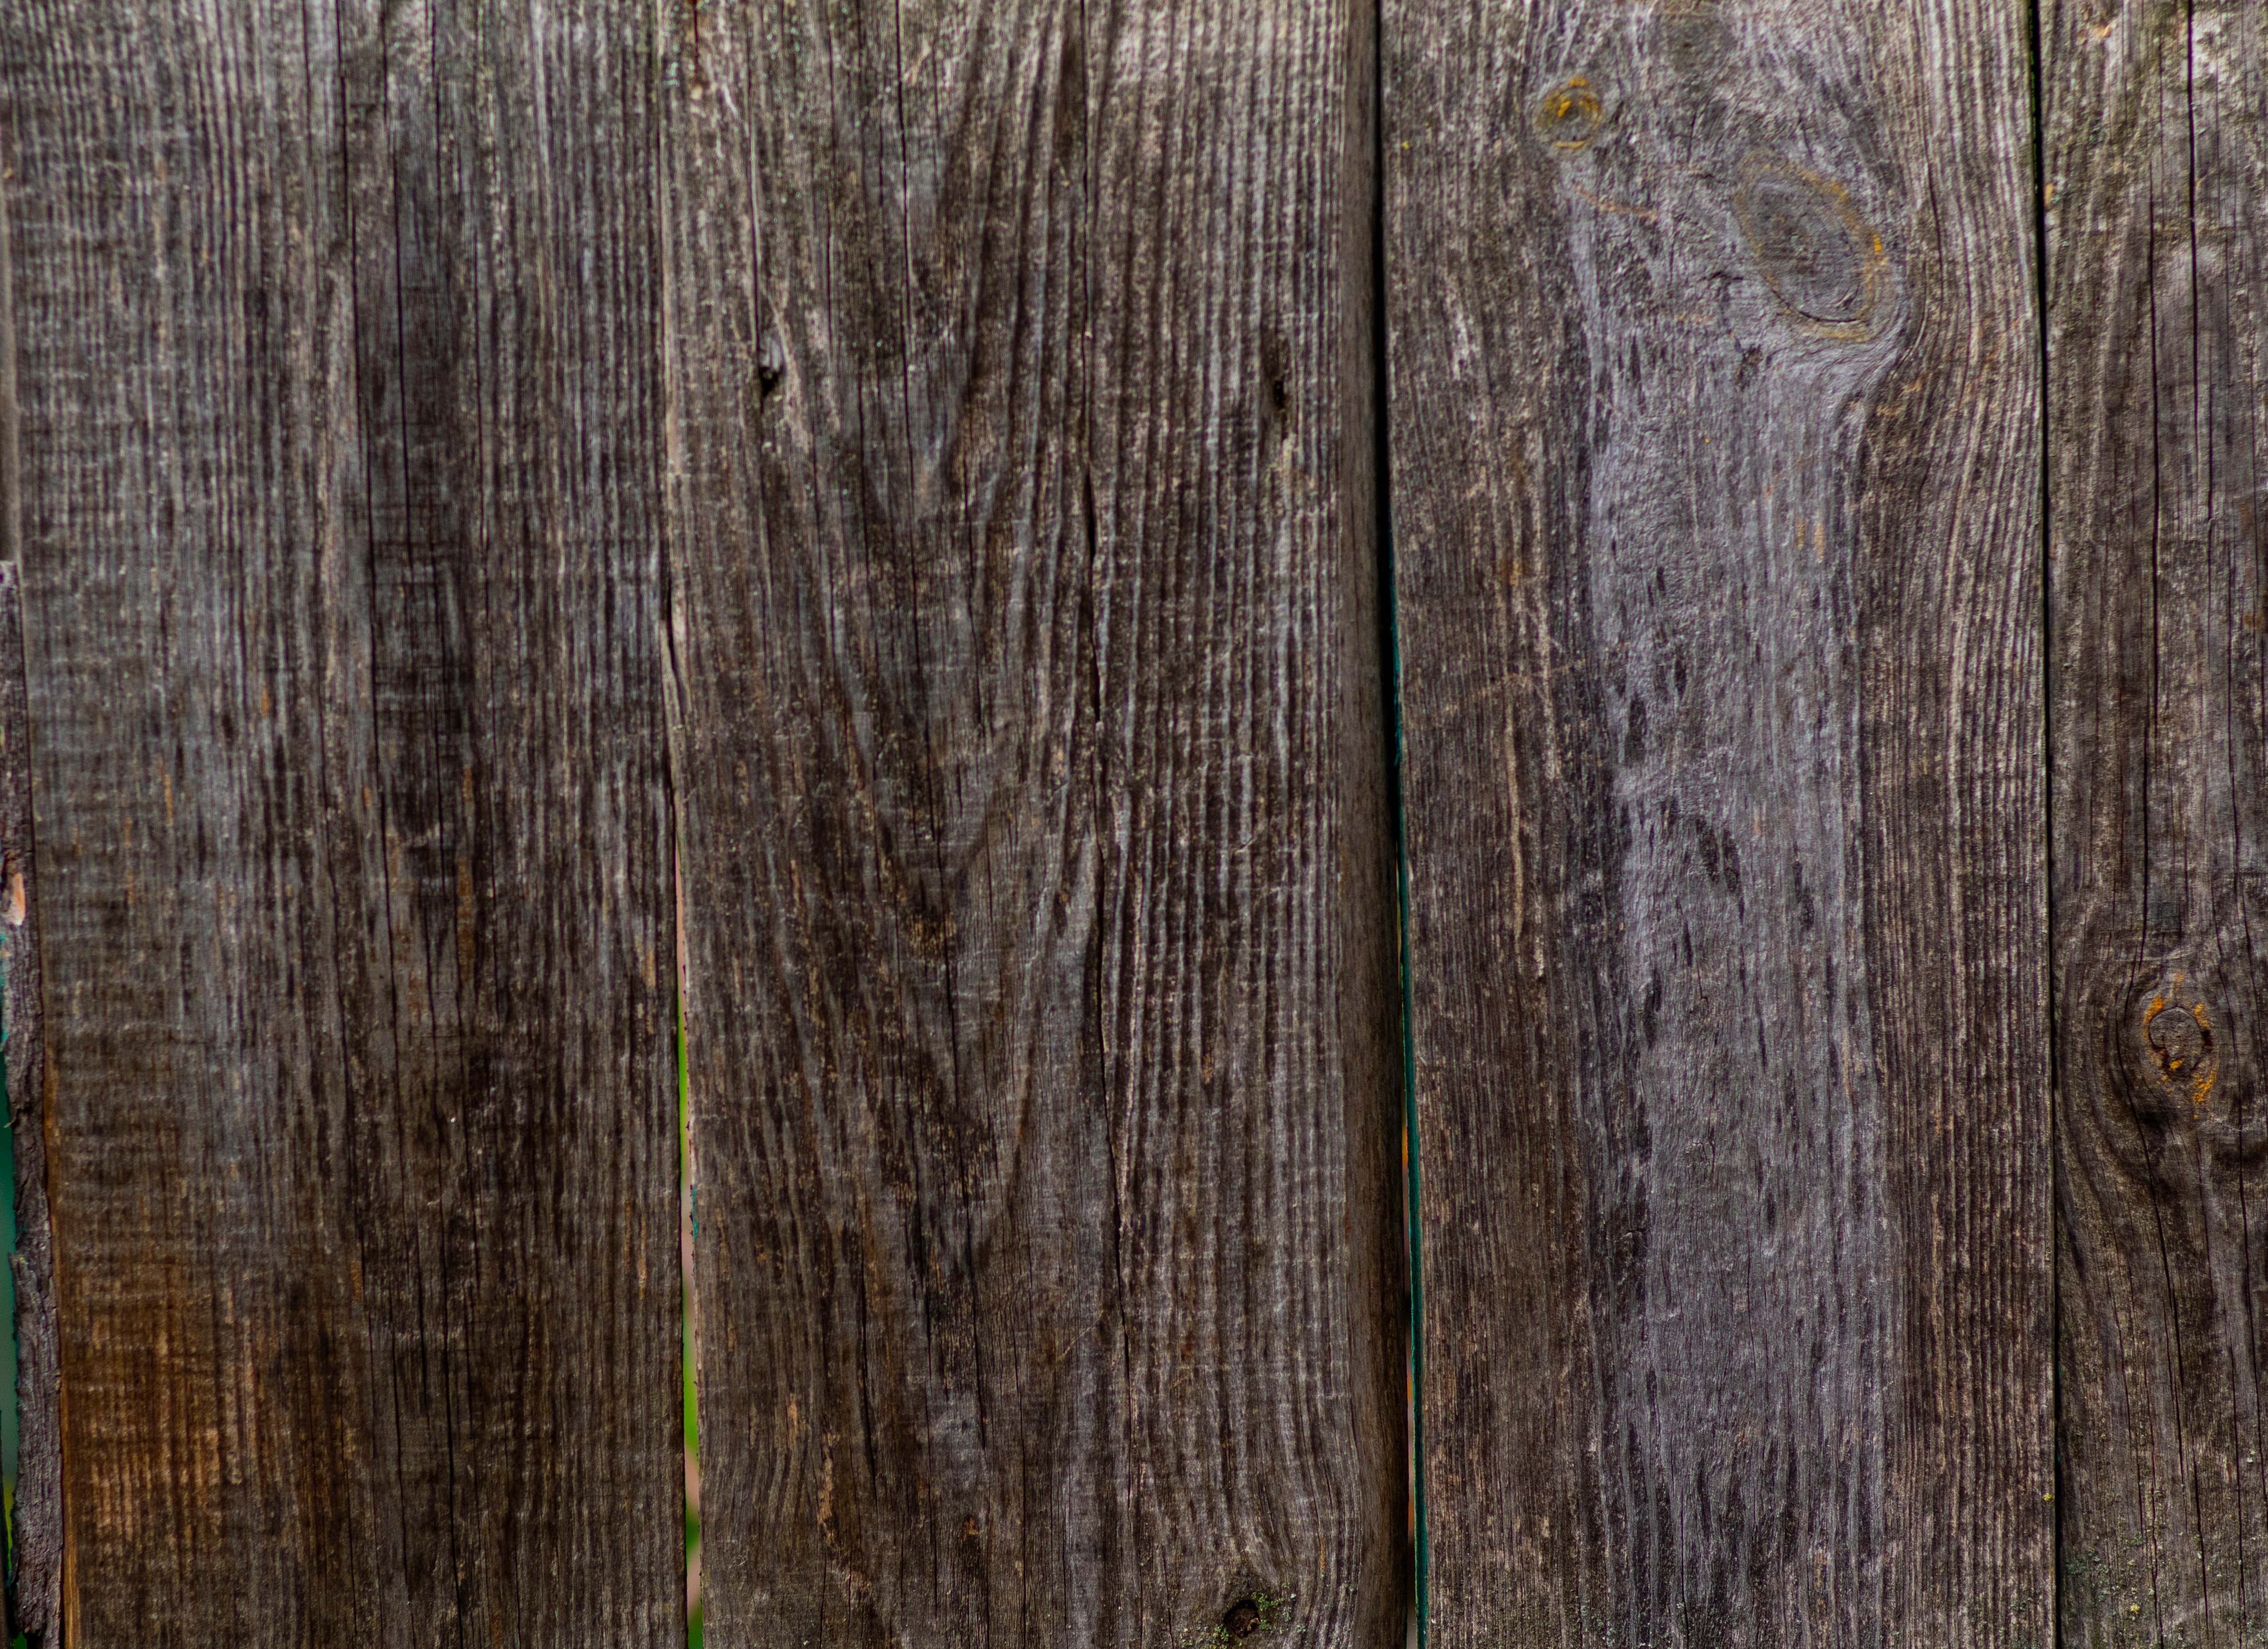 grey and black wooden surface